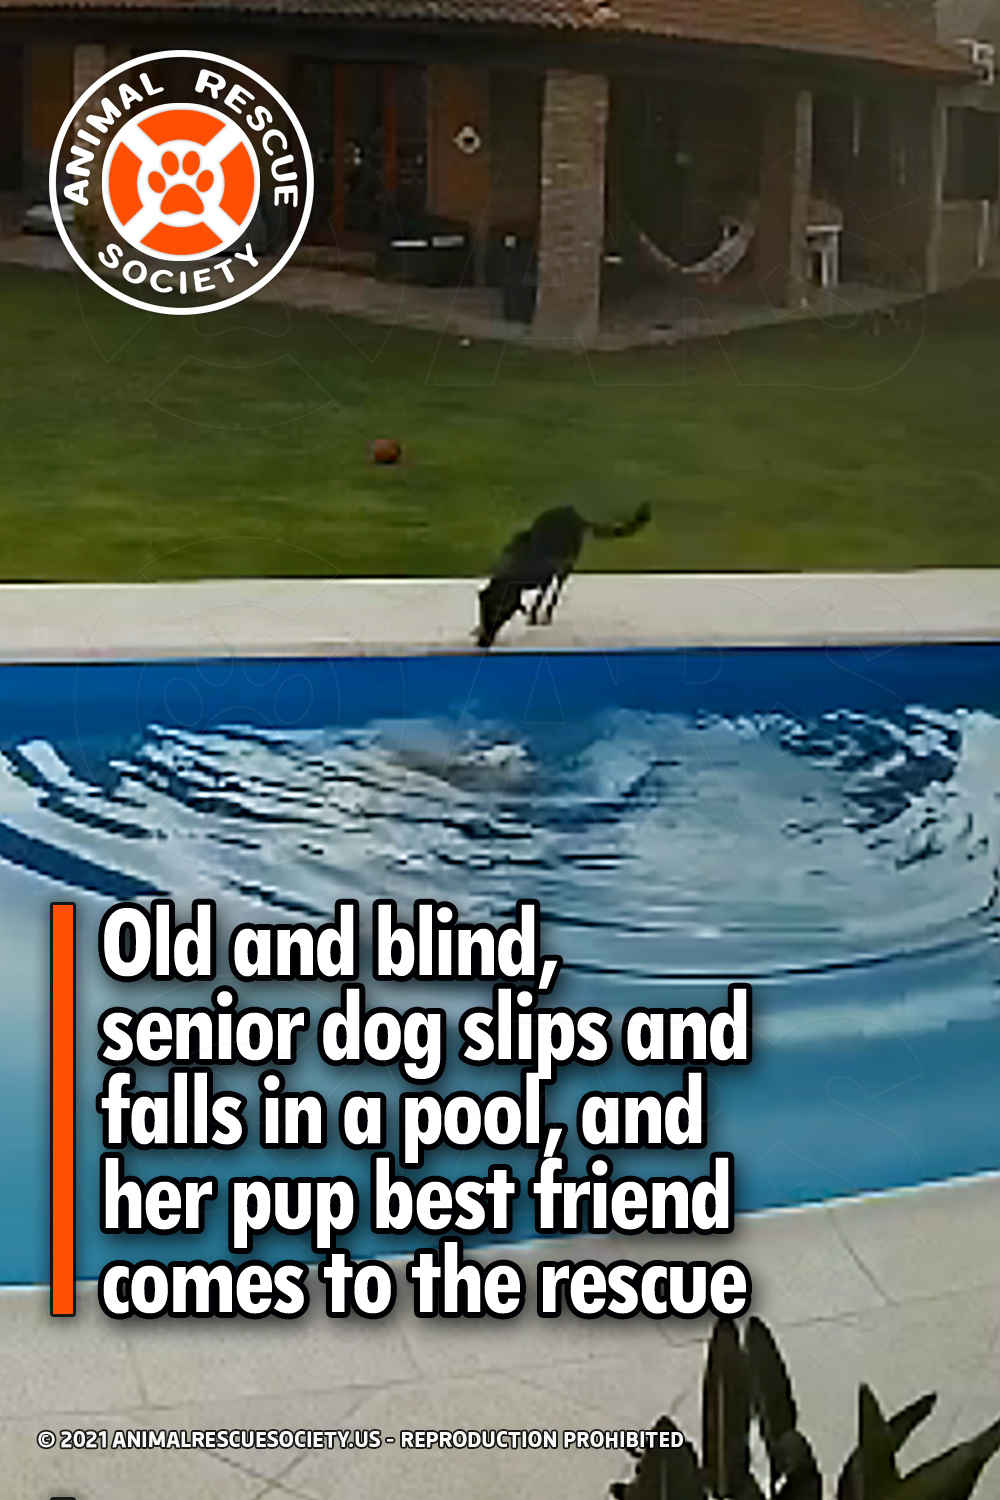 Old and blind, senior dog slips and falls in a pool, and her pup best friend comes to the rescue